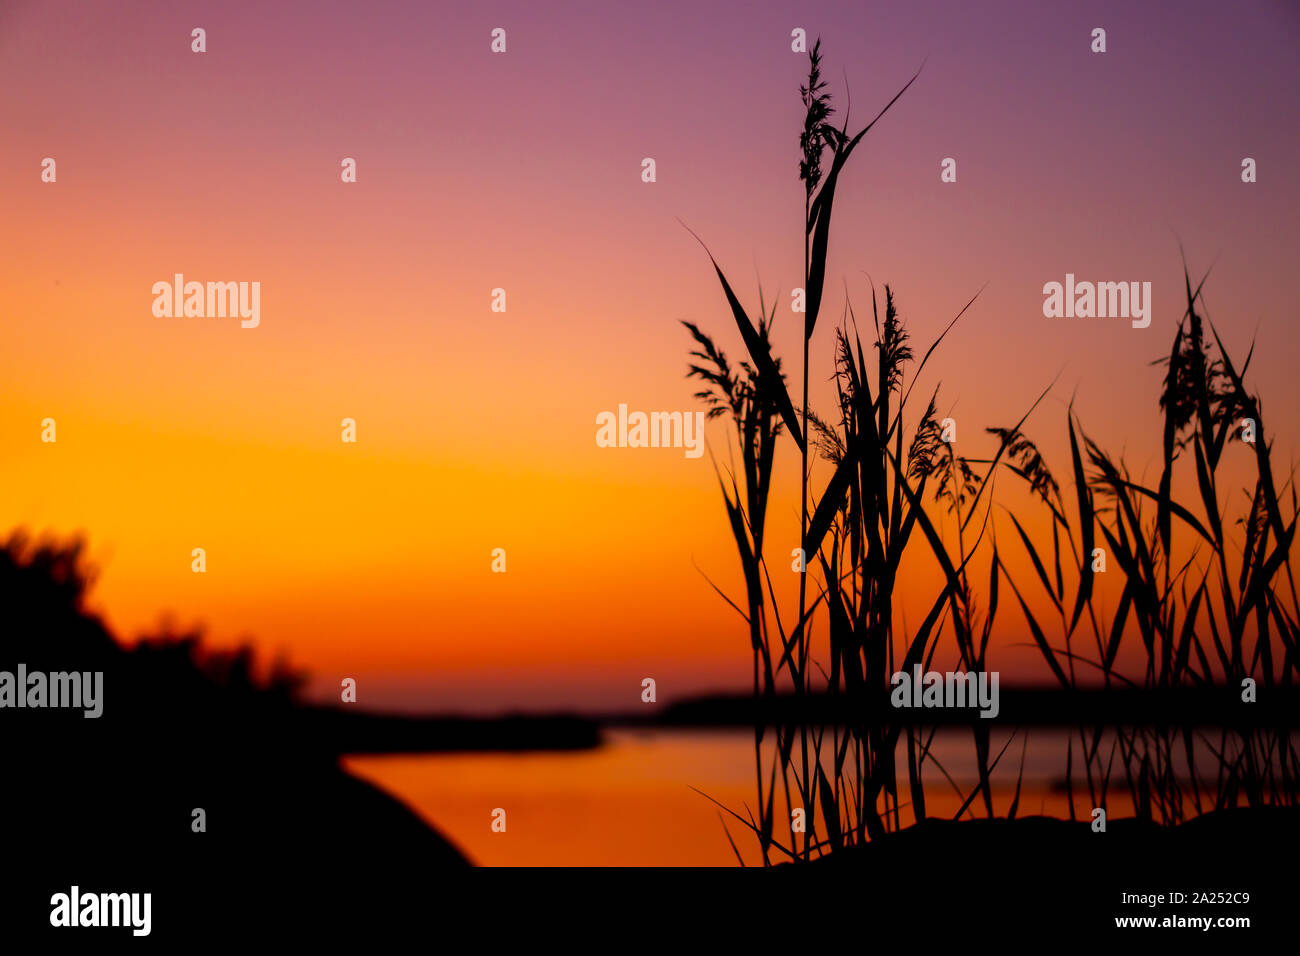 grass silhouette in sunset on lake Stock Photo